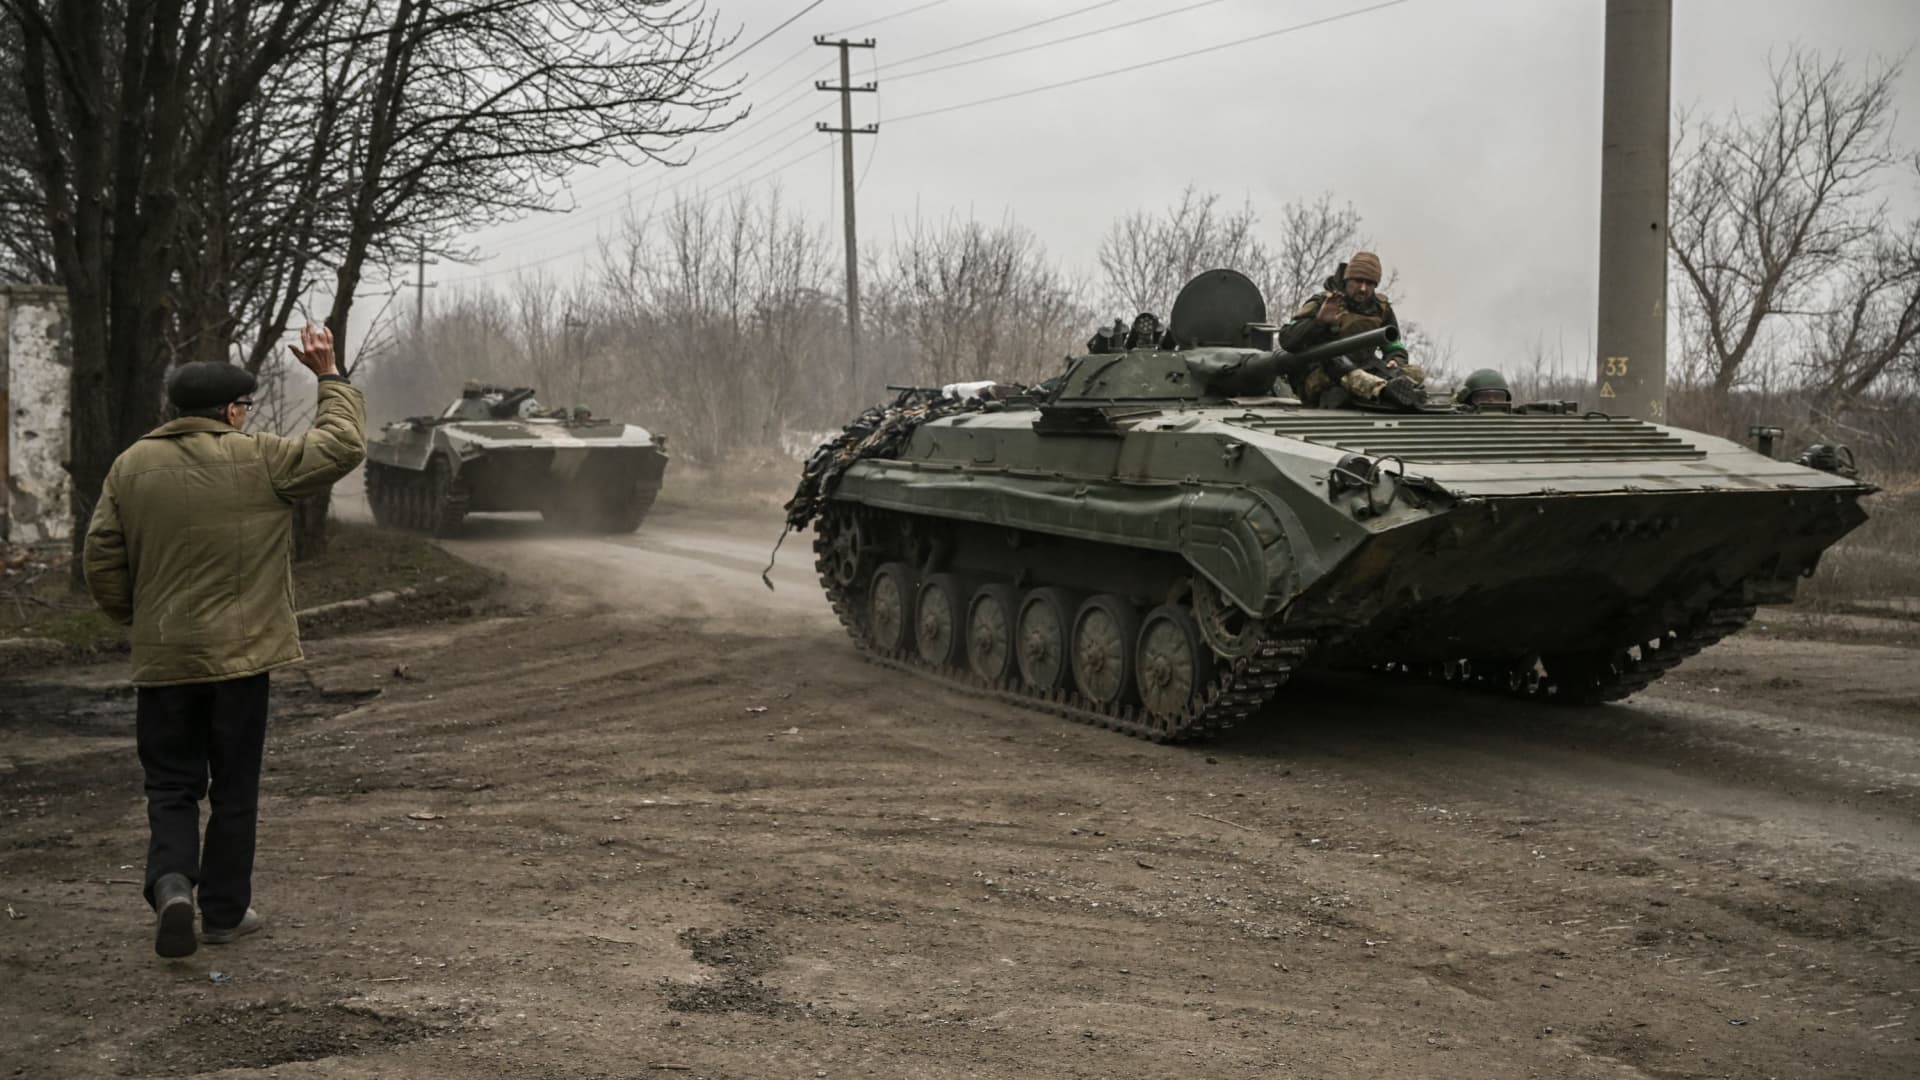 A local resident waves at a Ukrainian infantry fighting vehicle BMP-1 on their way to the frontline, near Bakhmut, eastern Ukraine, on March 17, 2023, amid the Russian invasion of Ukraine.